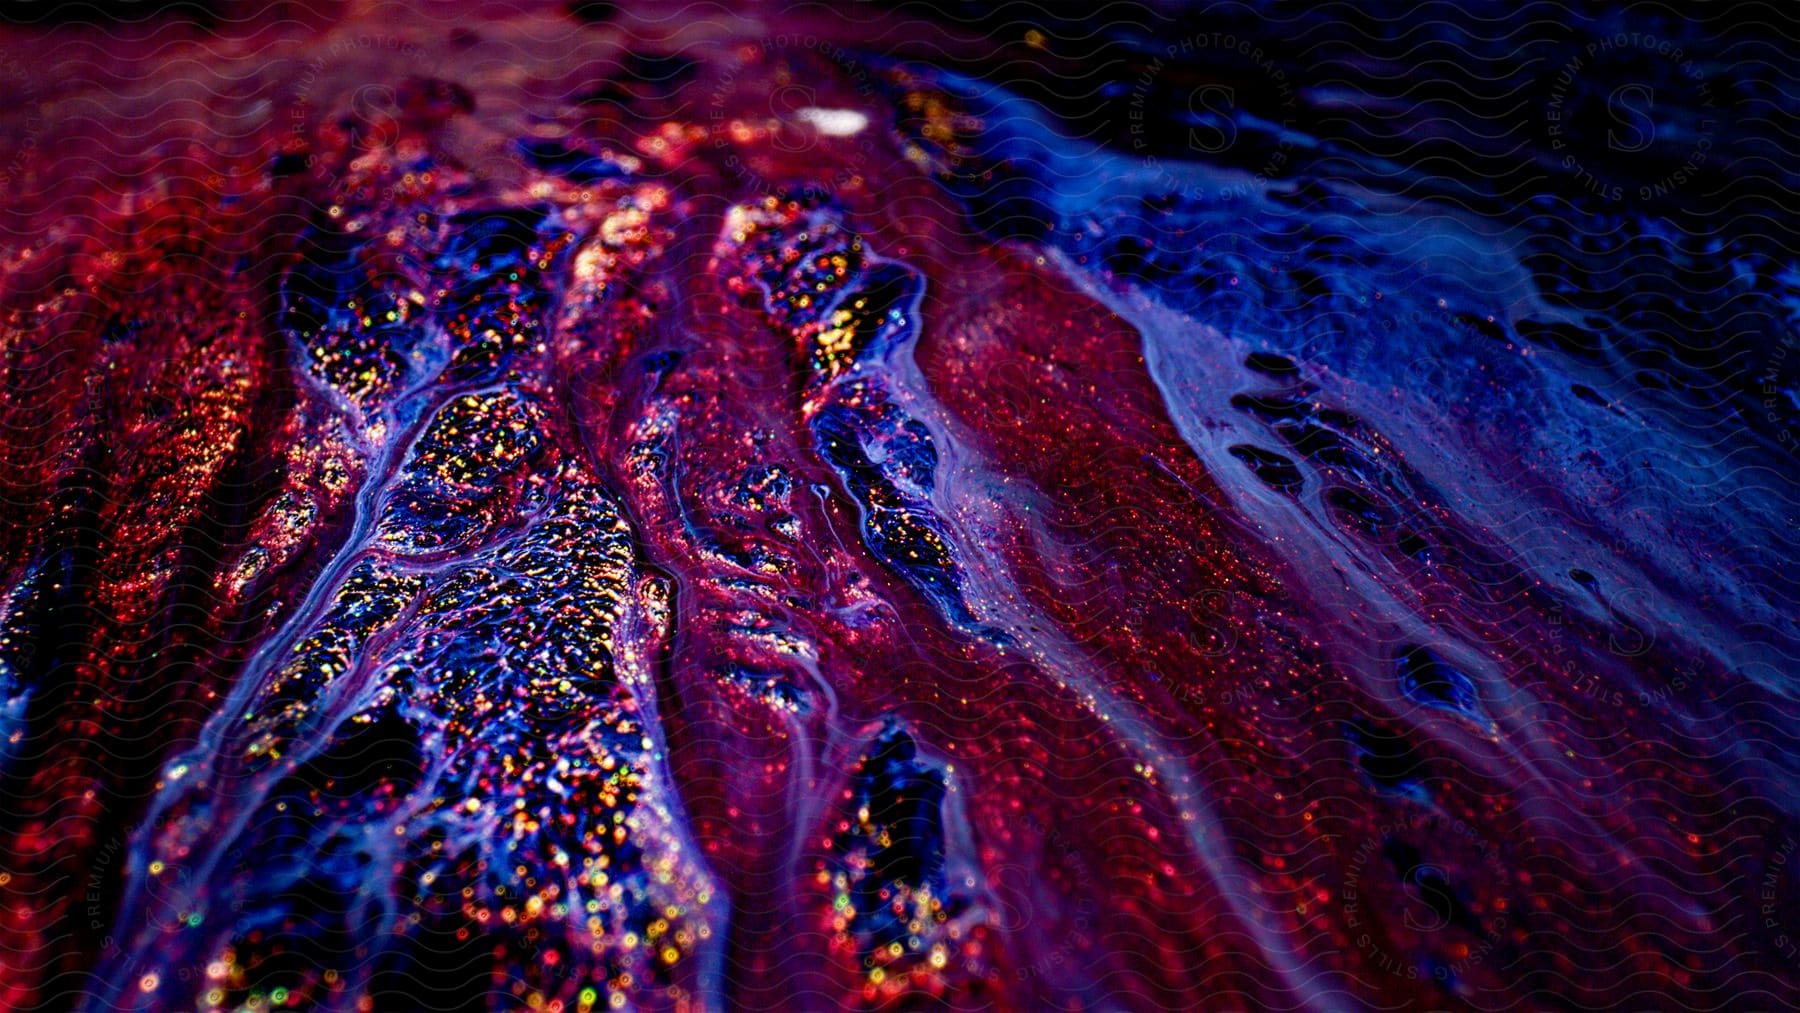 A violet colored liquid runs down a shiny red metallic surface reflecting light